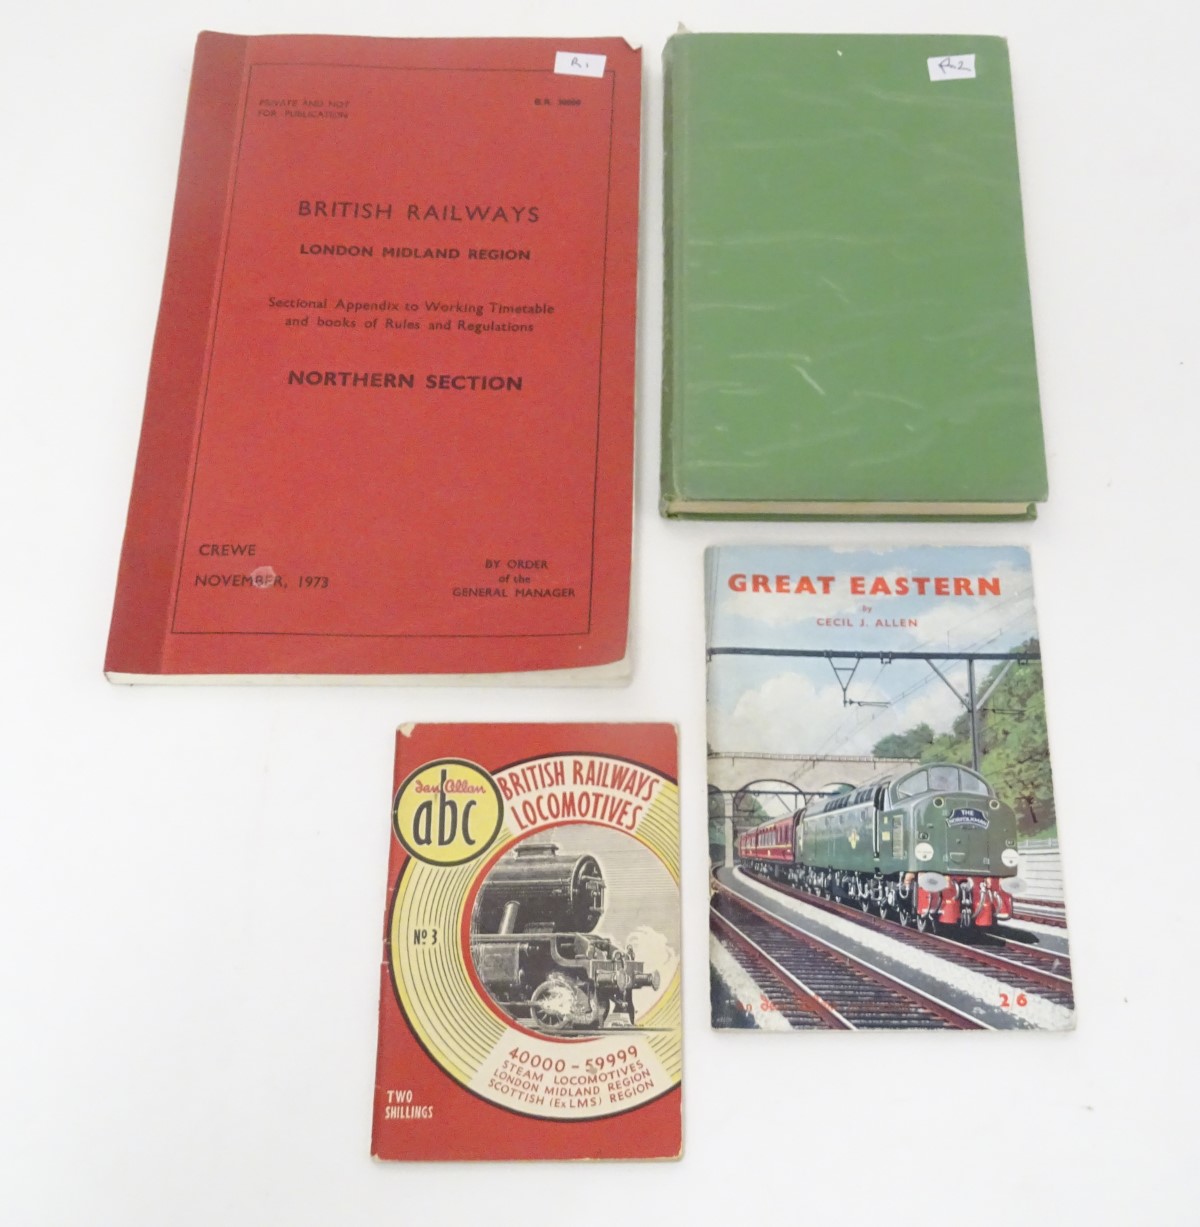 A quantity of texts on the subject of railways, to include British Railways, London Midland Region,